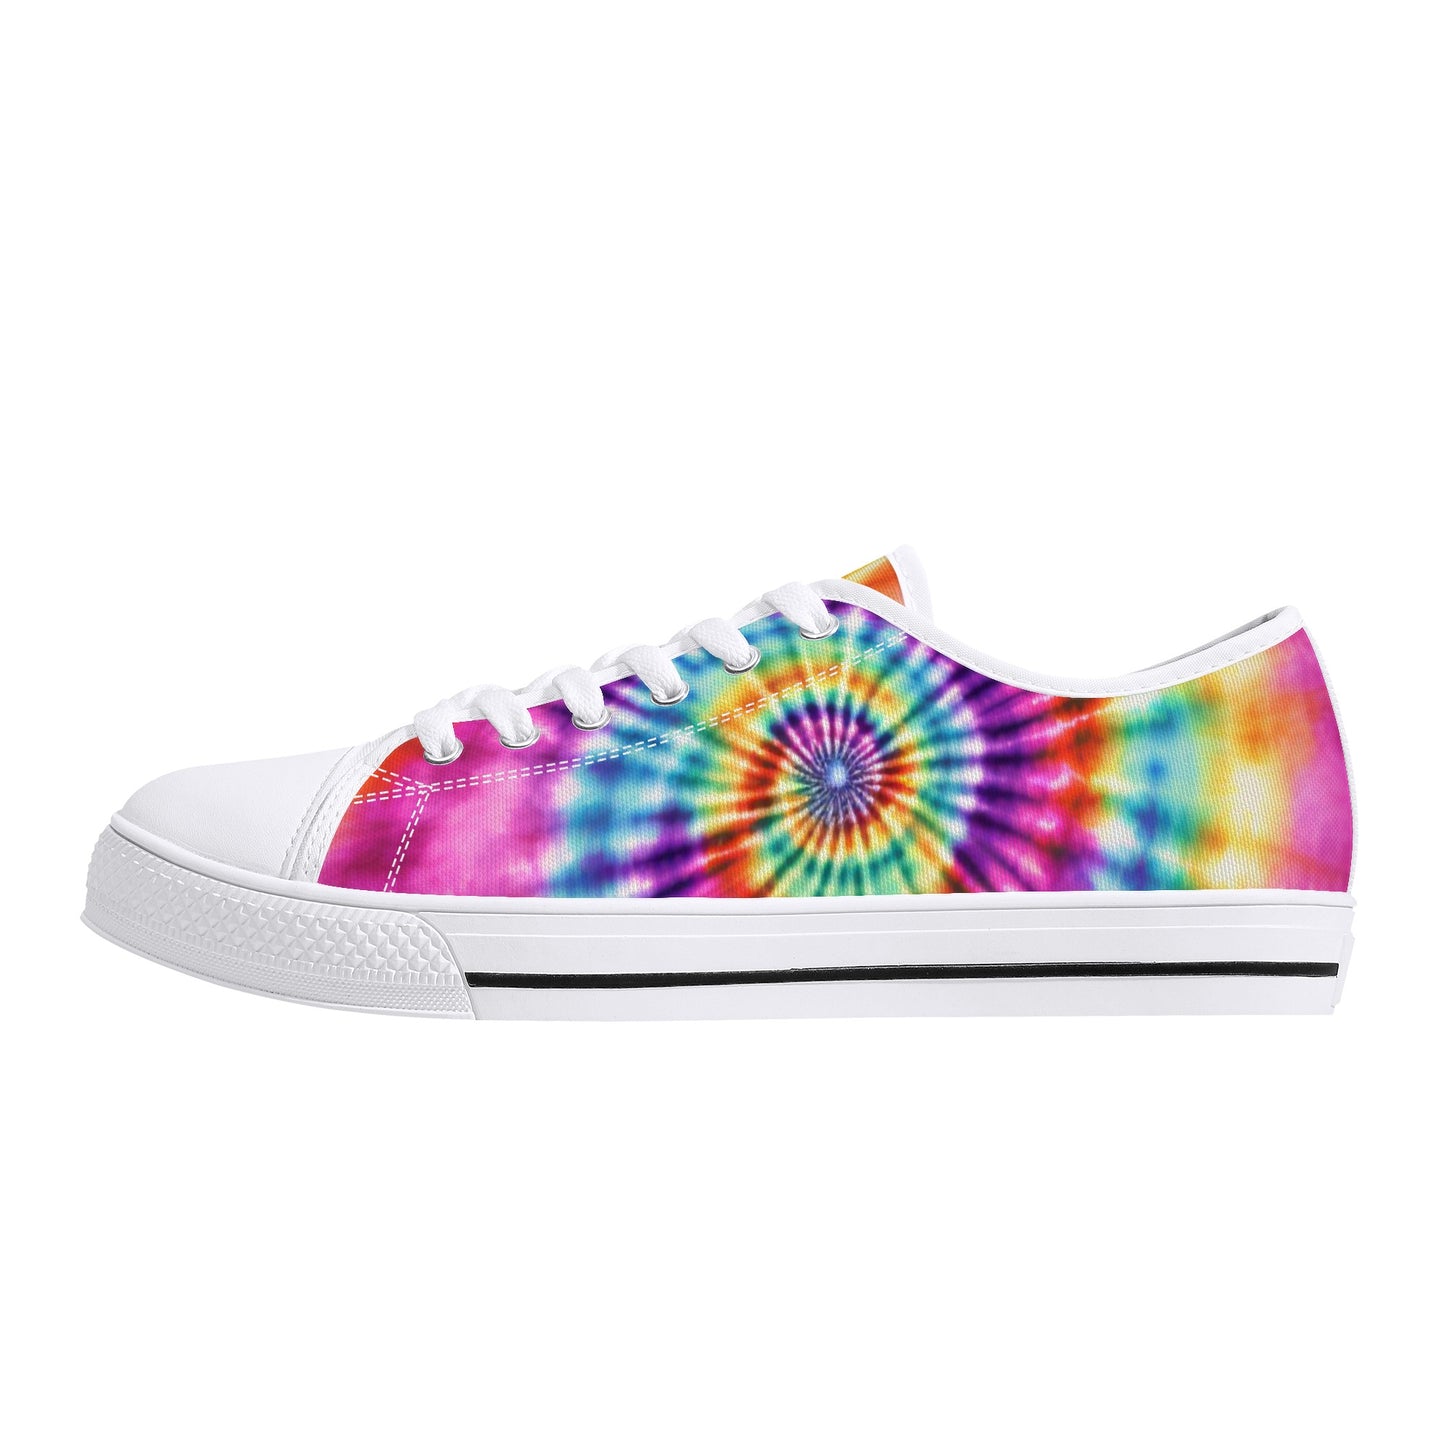 Tie Dye Women Shoes, Pink Sneakers Canvas White Black Low Top Lace Up Custom Girls Aesthetic Flat Shoes